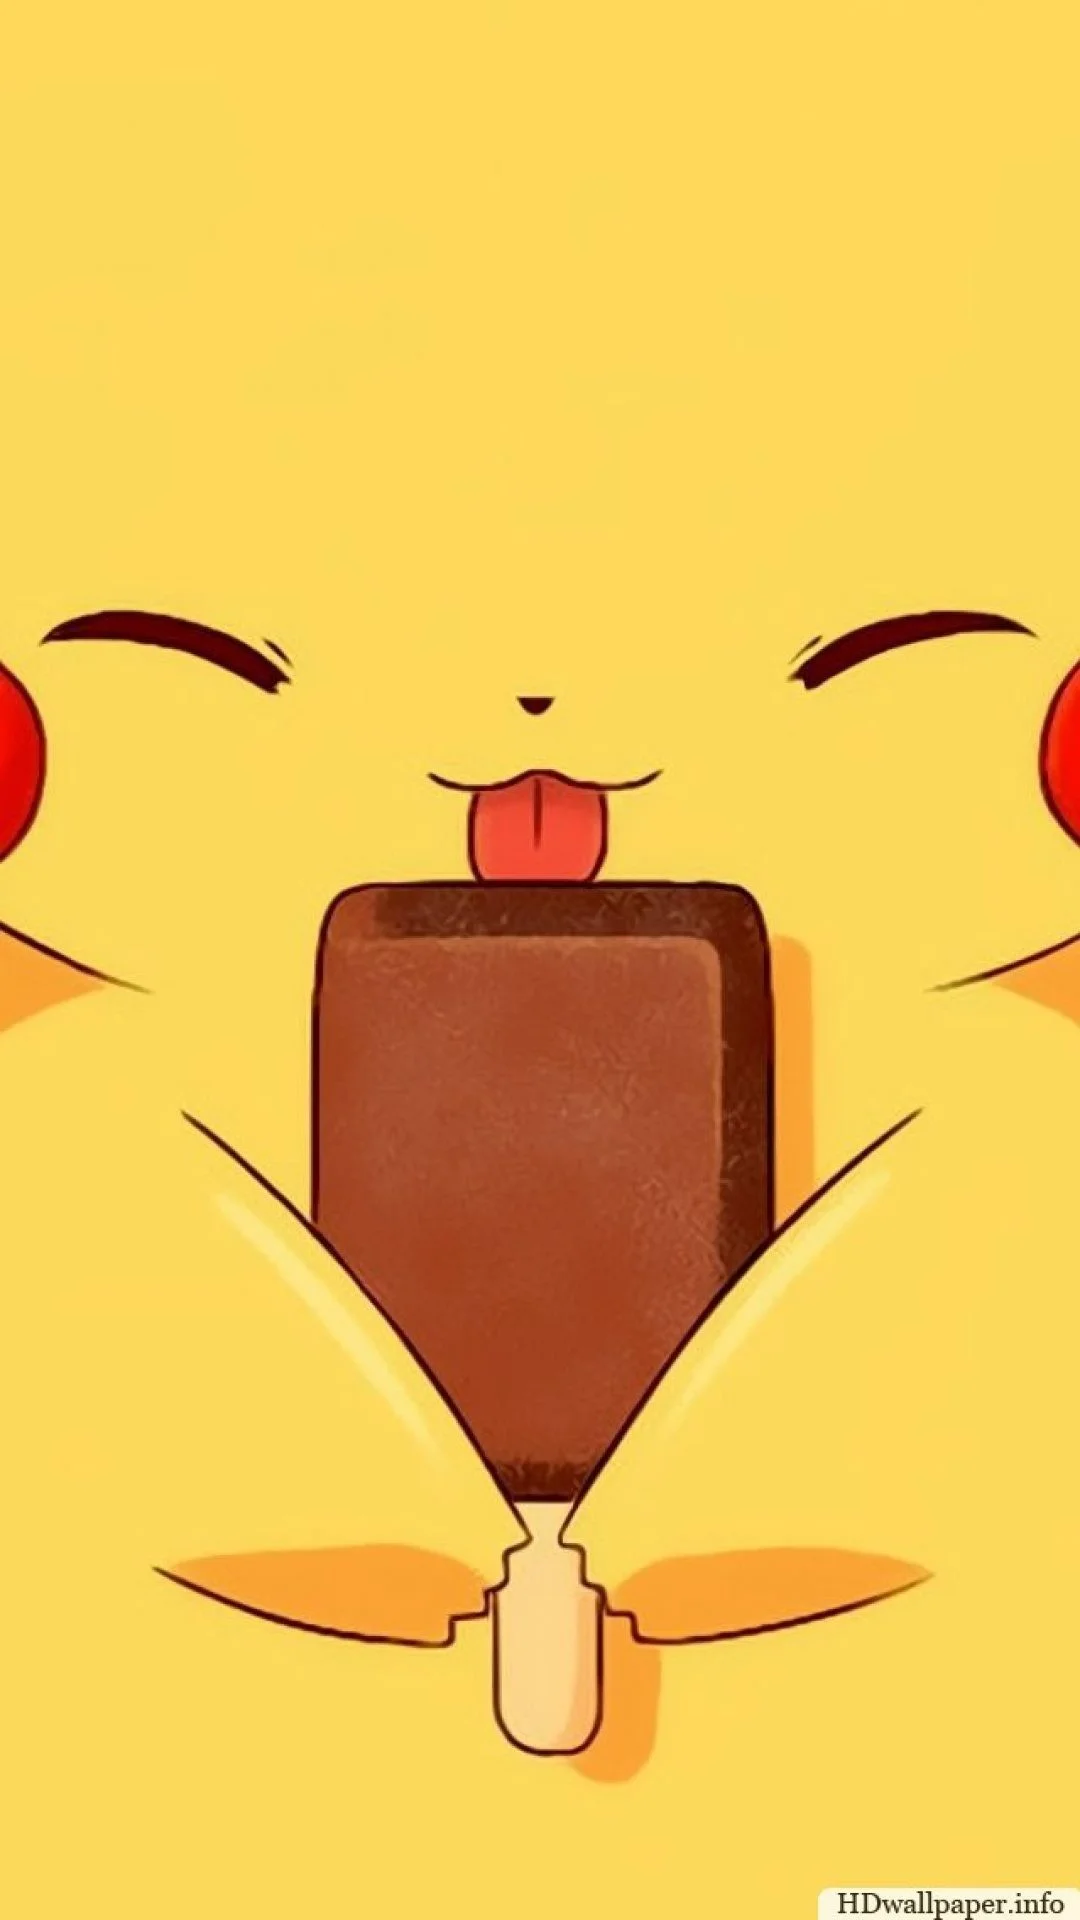 Pikachu wallpaper for android